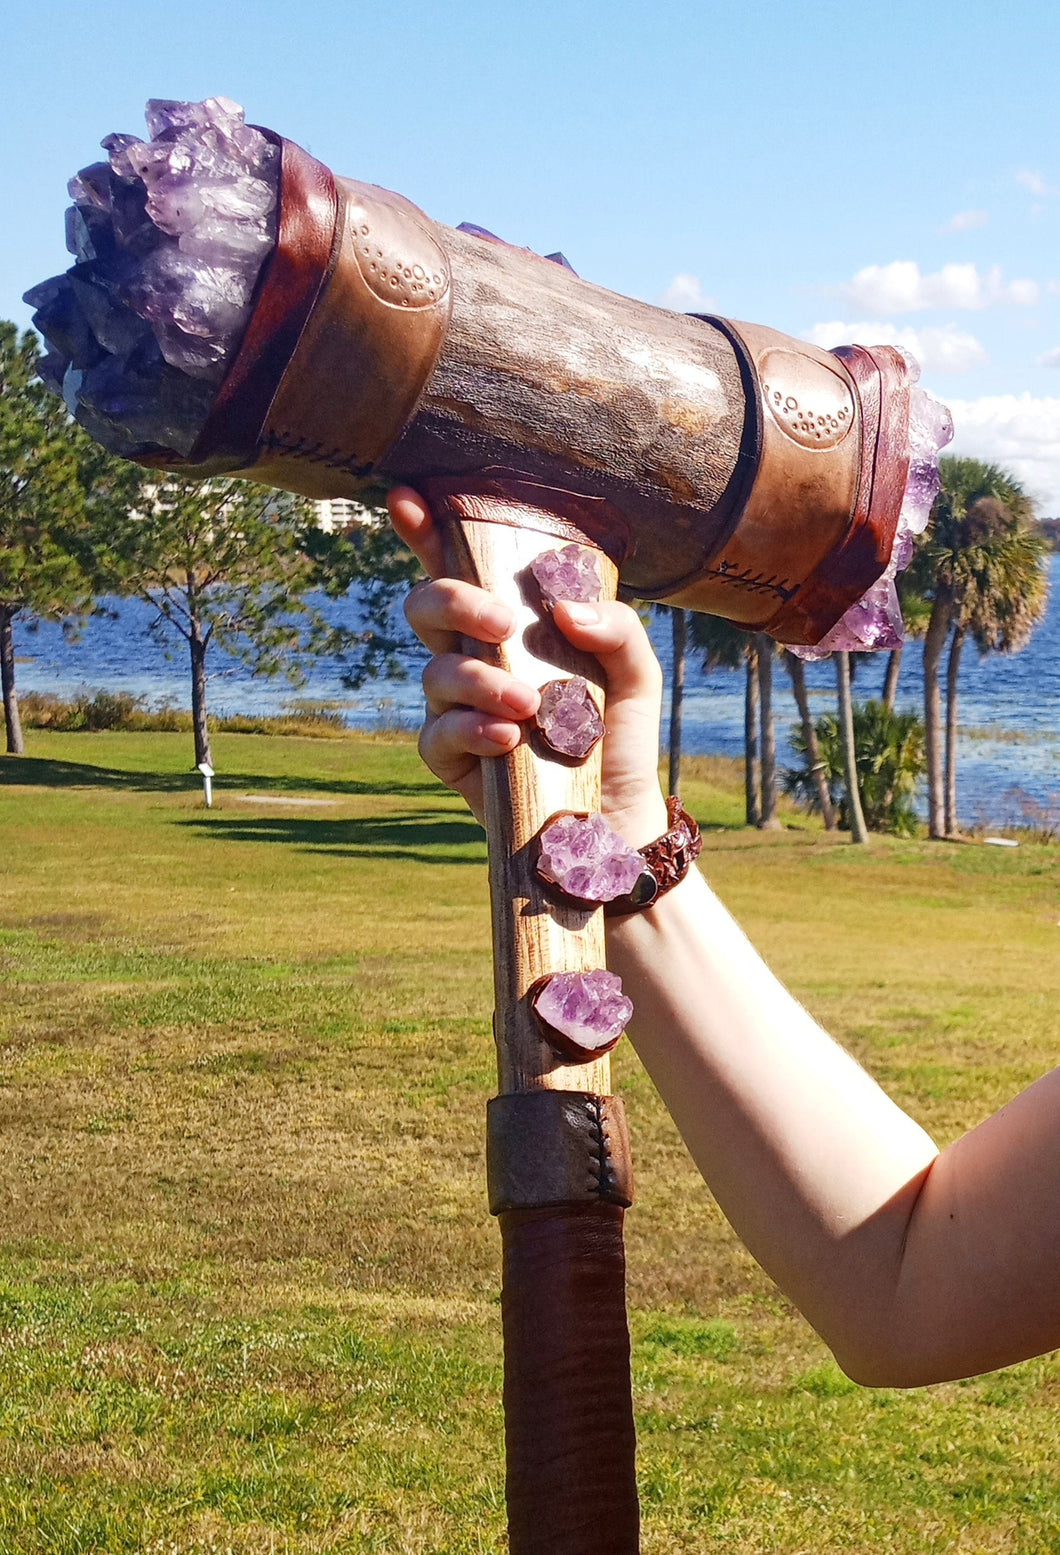 READY TO SHIP Amethyst War Hammer - One of a Kind Crystal and Wood Hammer - Wiccan Pagan Ritual Tool God Art Hammer Natural Materials